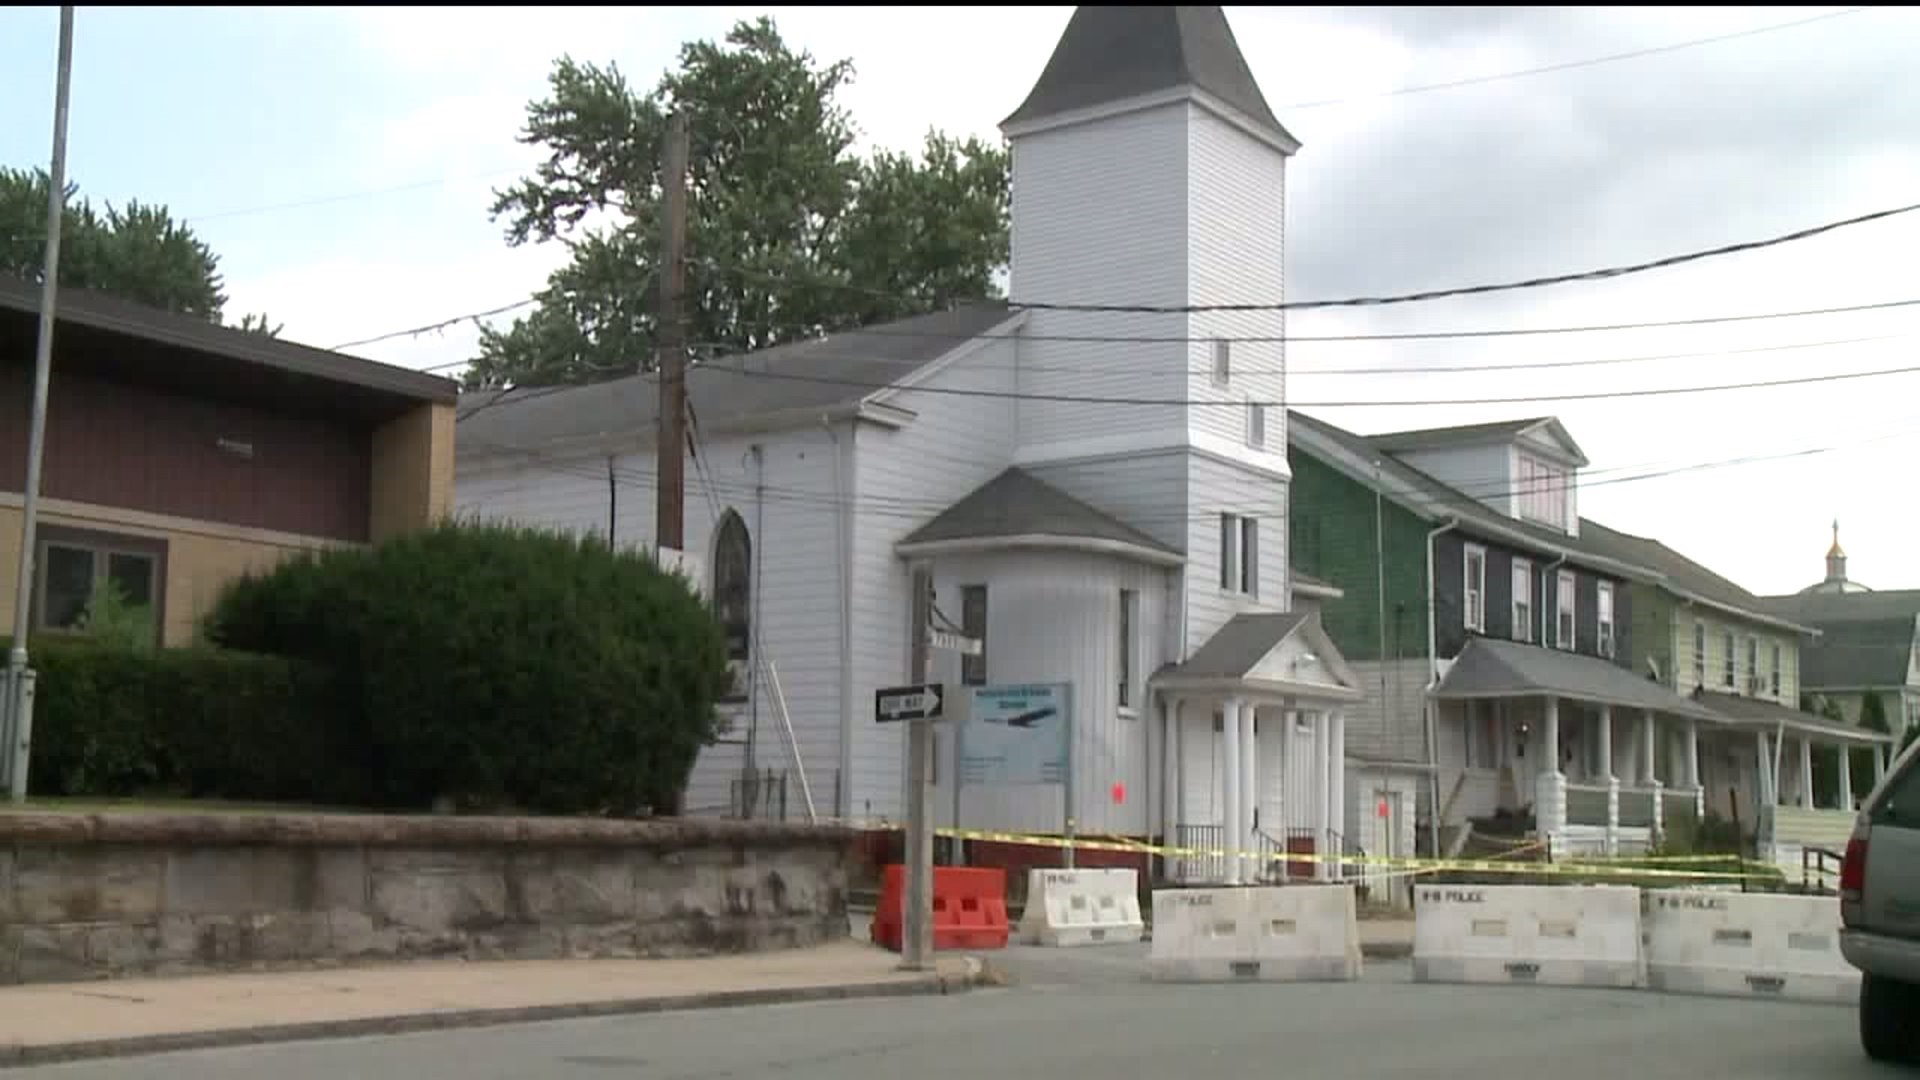 Church's Ceiling Collapses in Wilkes-Barre